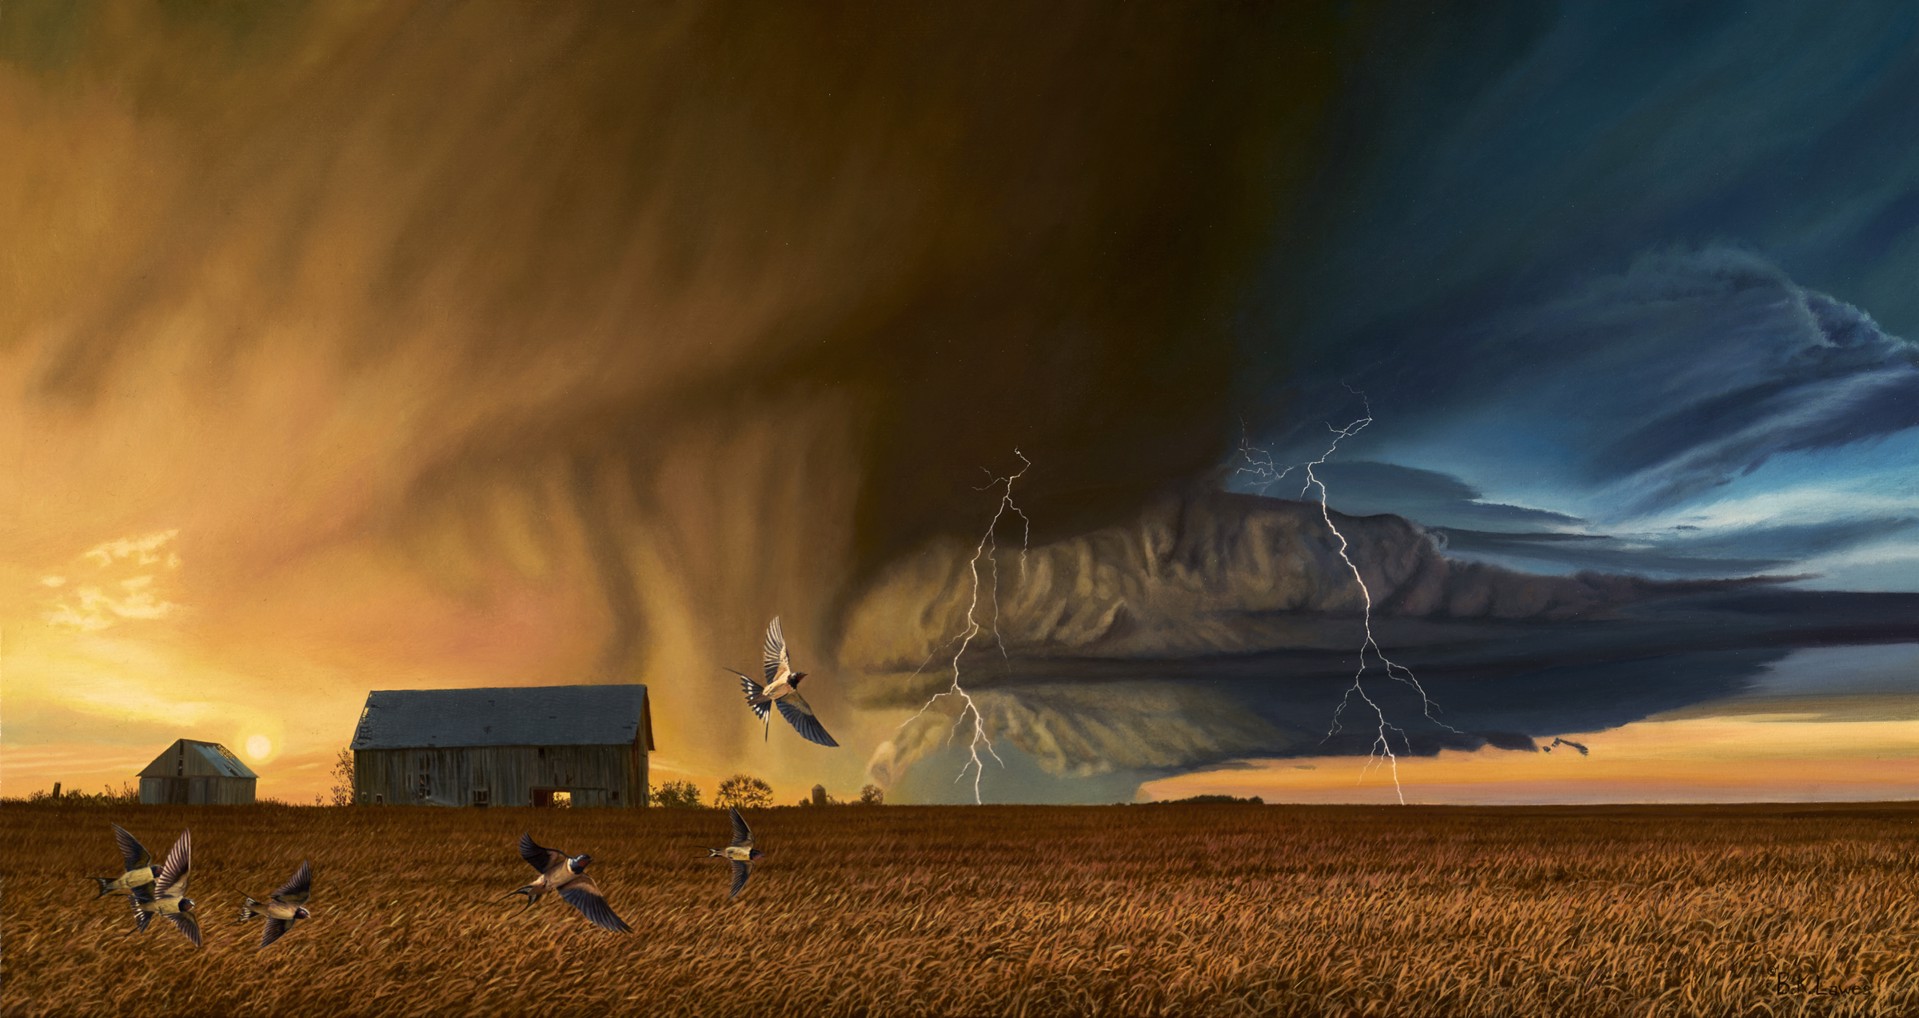 Racing the Storm by Bruce K. Lawes